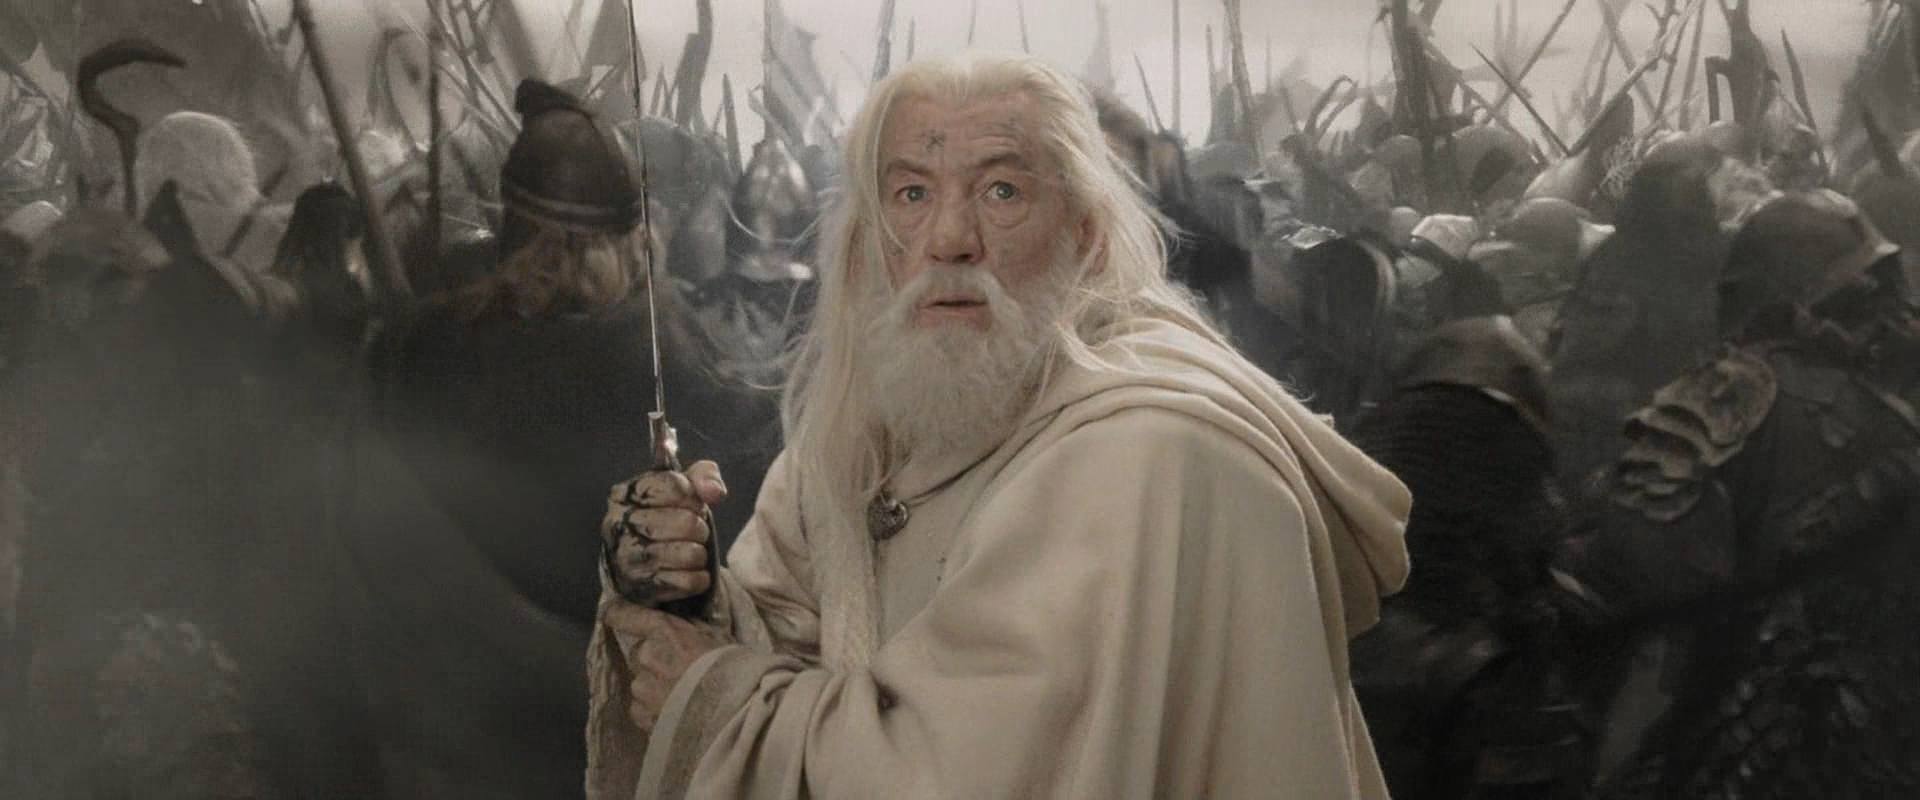 Gandalf (Ian McKellen) fighting in battle in 'Lord of the Rings: The Return of the King'